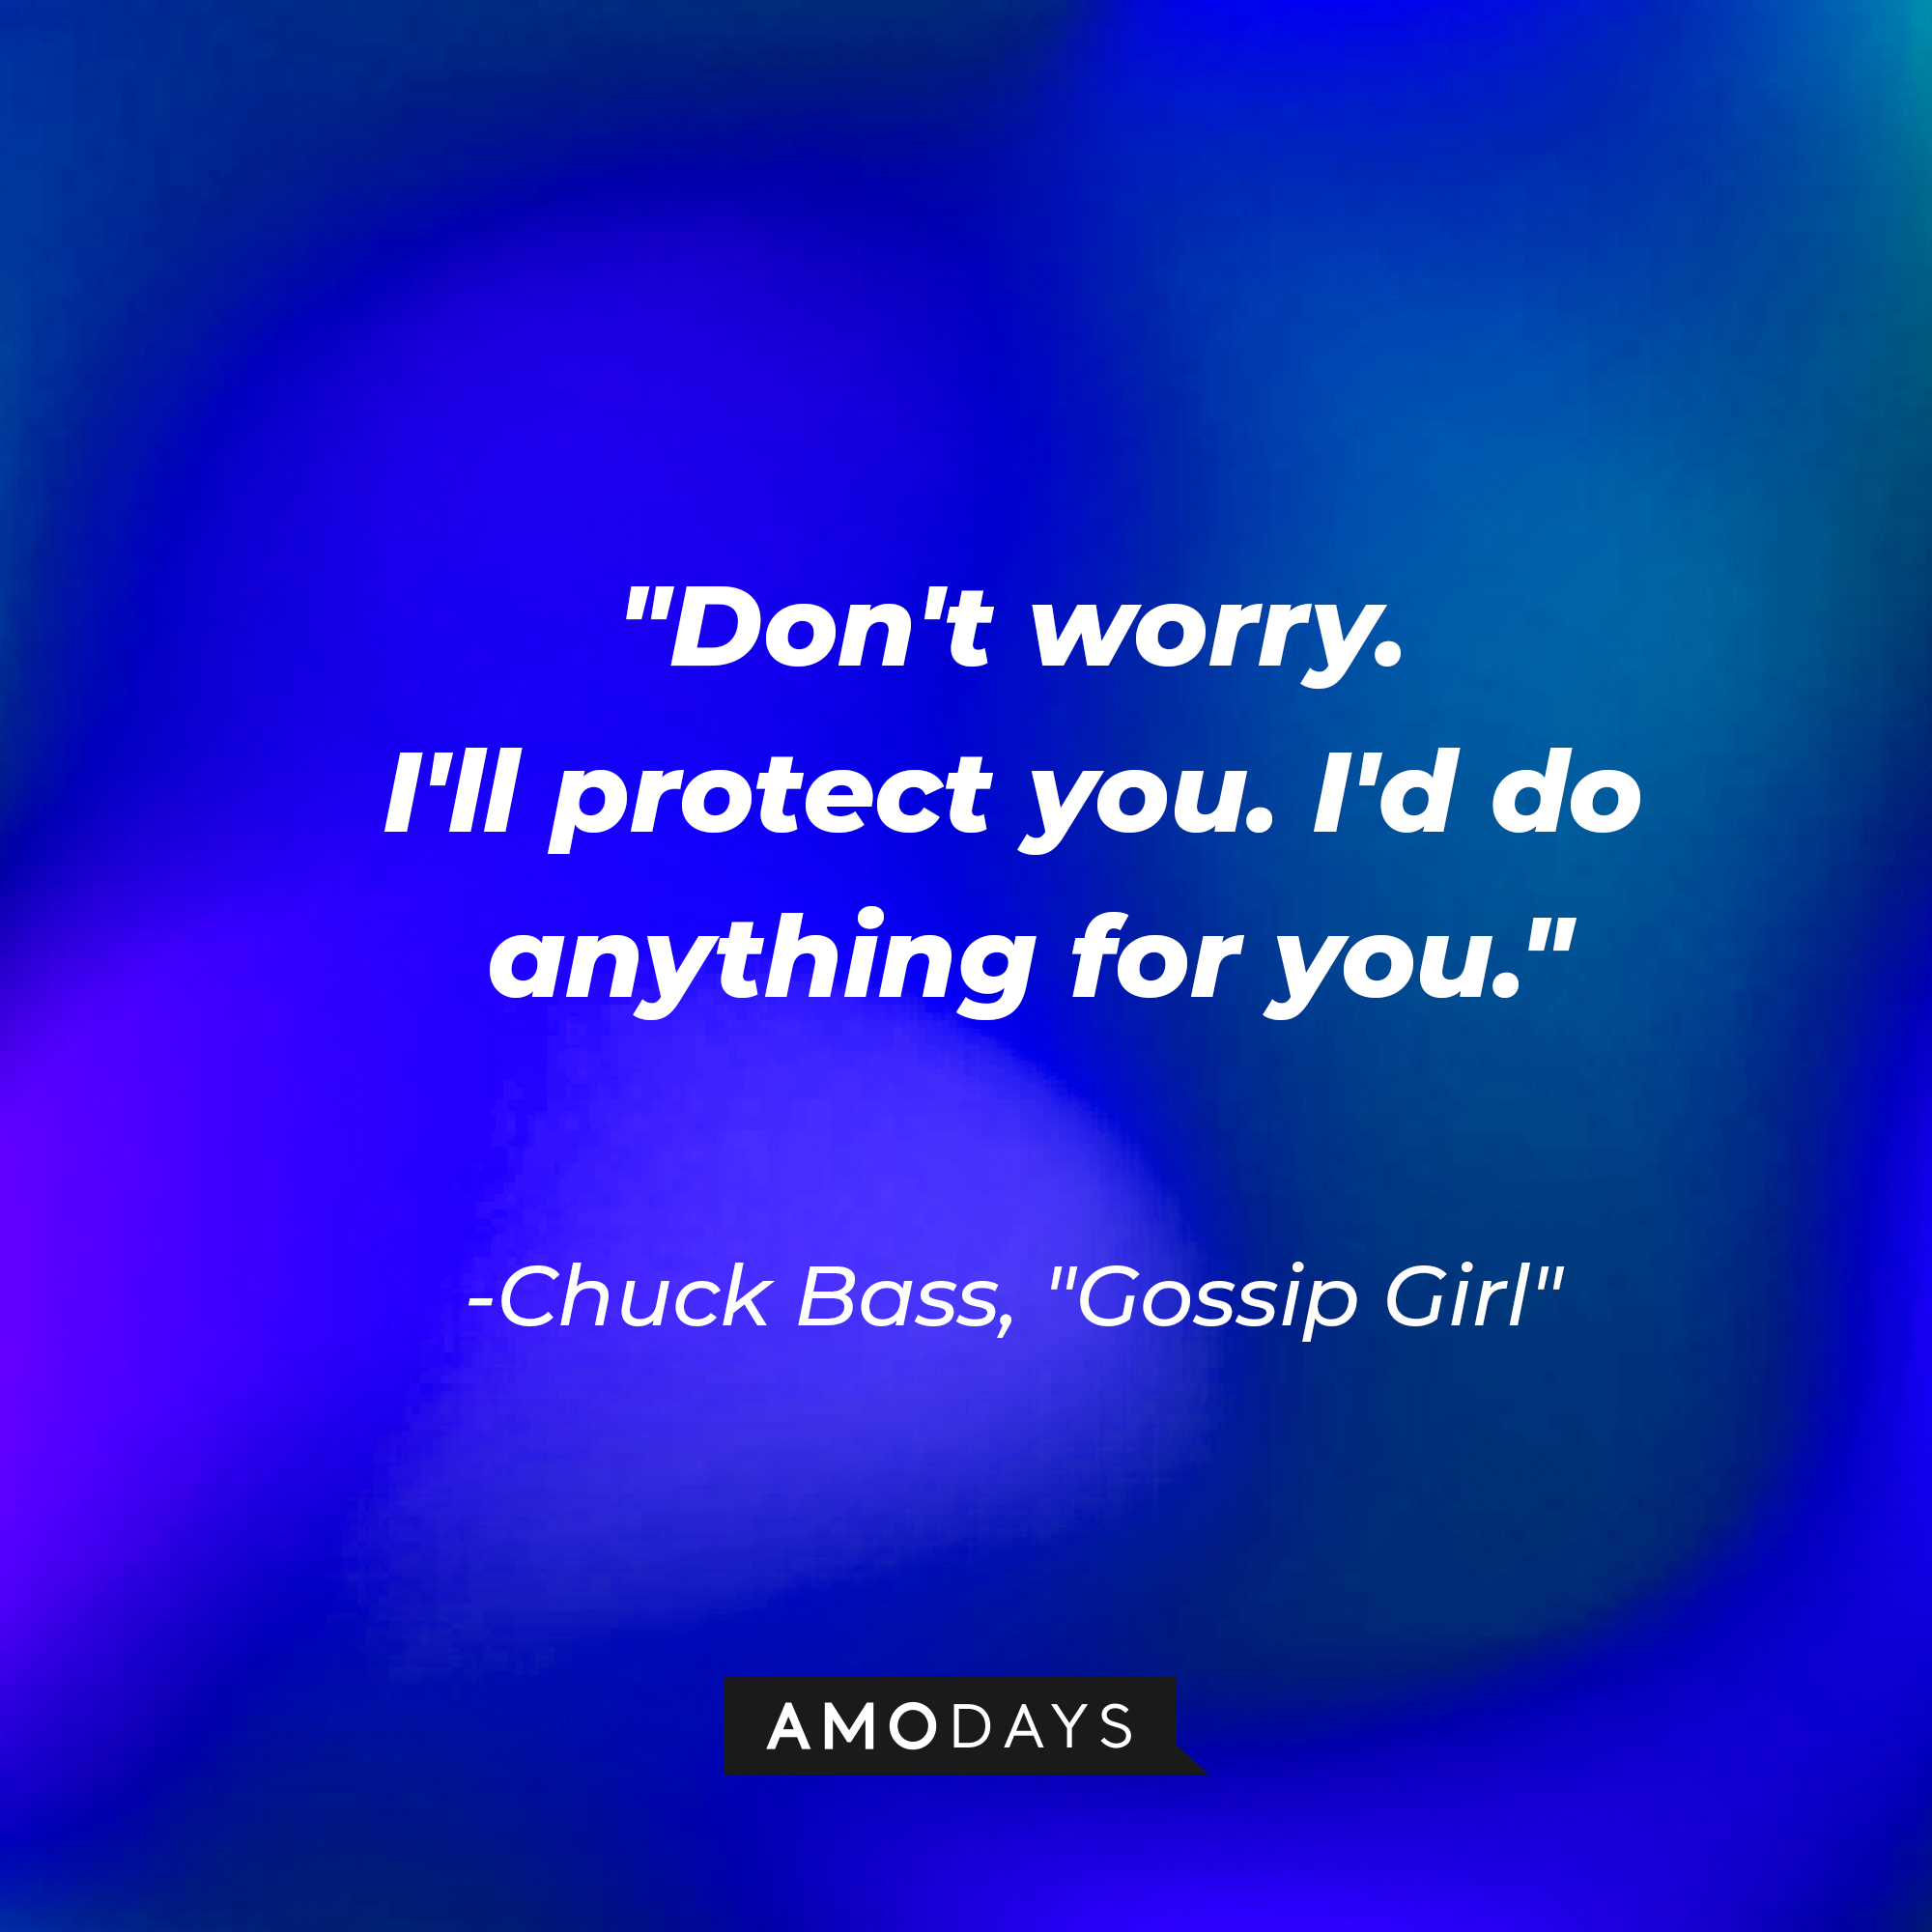 Chuck Bass' quote: "Don't worry. I'll protect you. I'd do anything for you." | Source: AmoDays